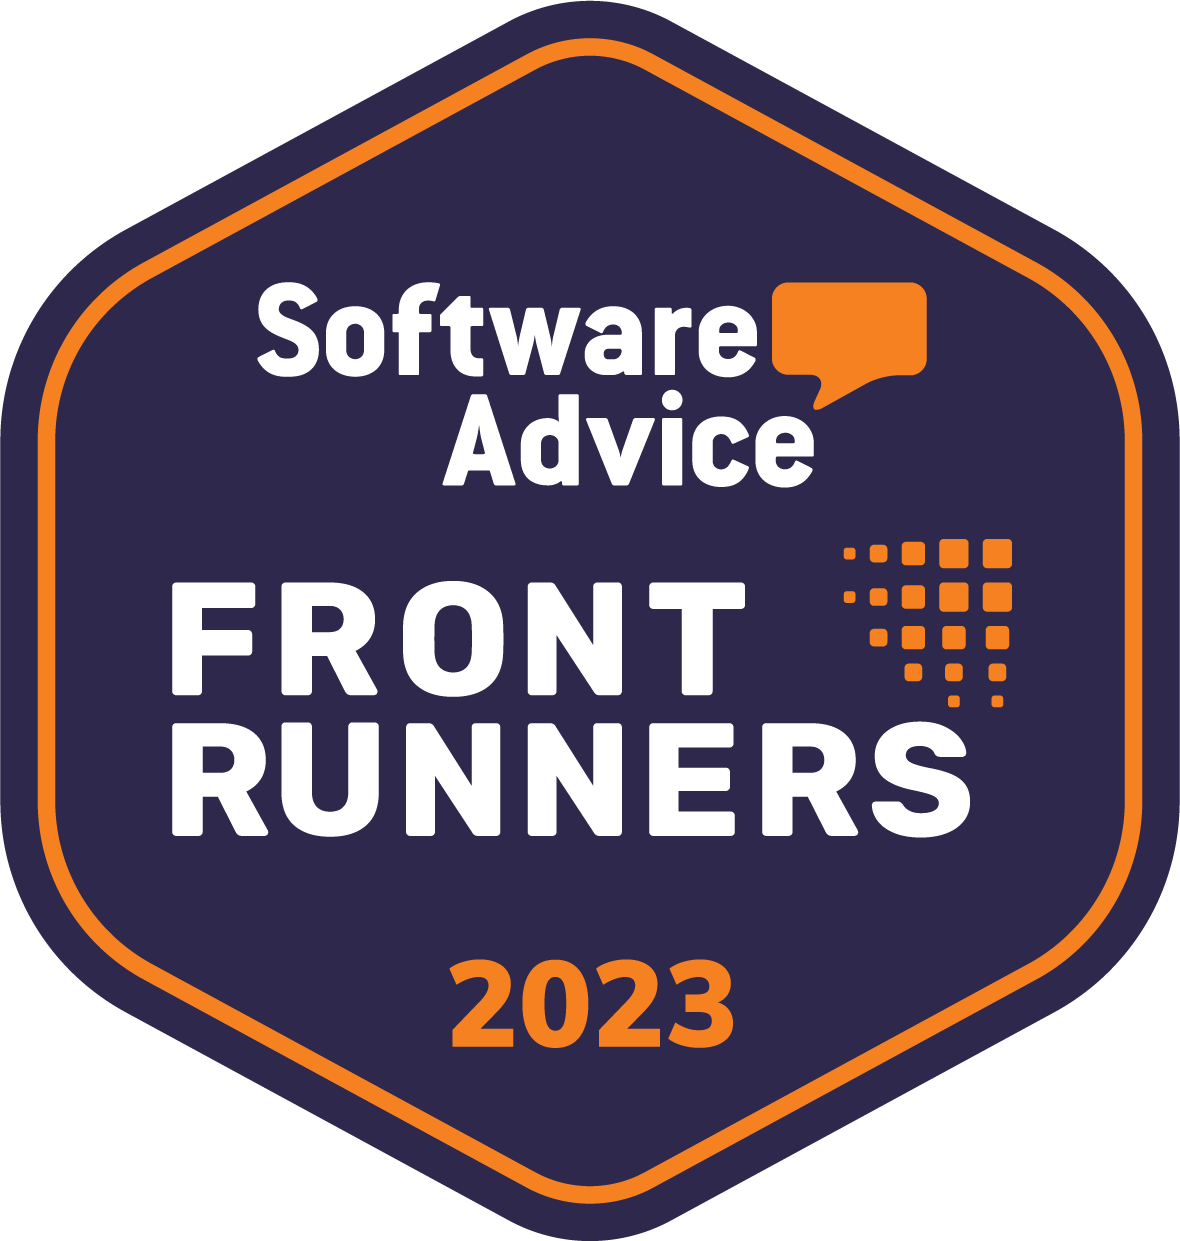 software advice front runners 2023 icon